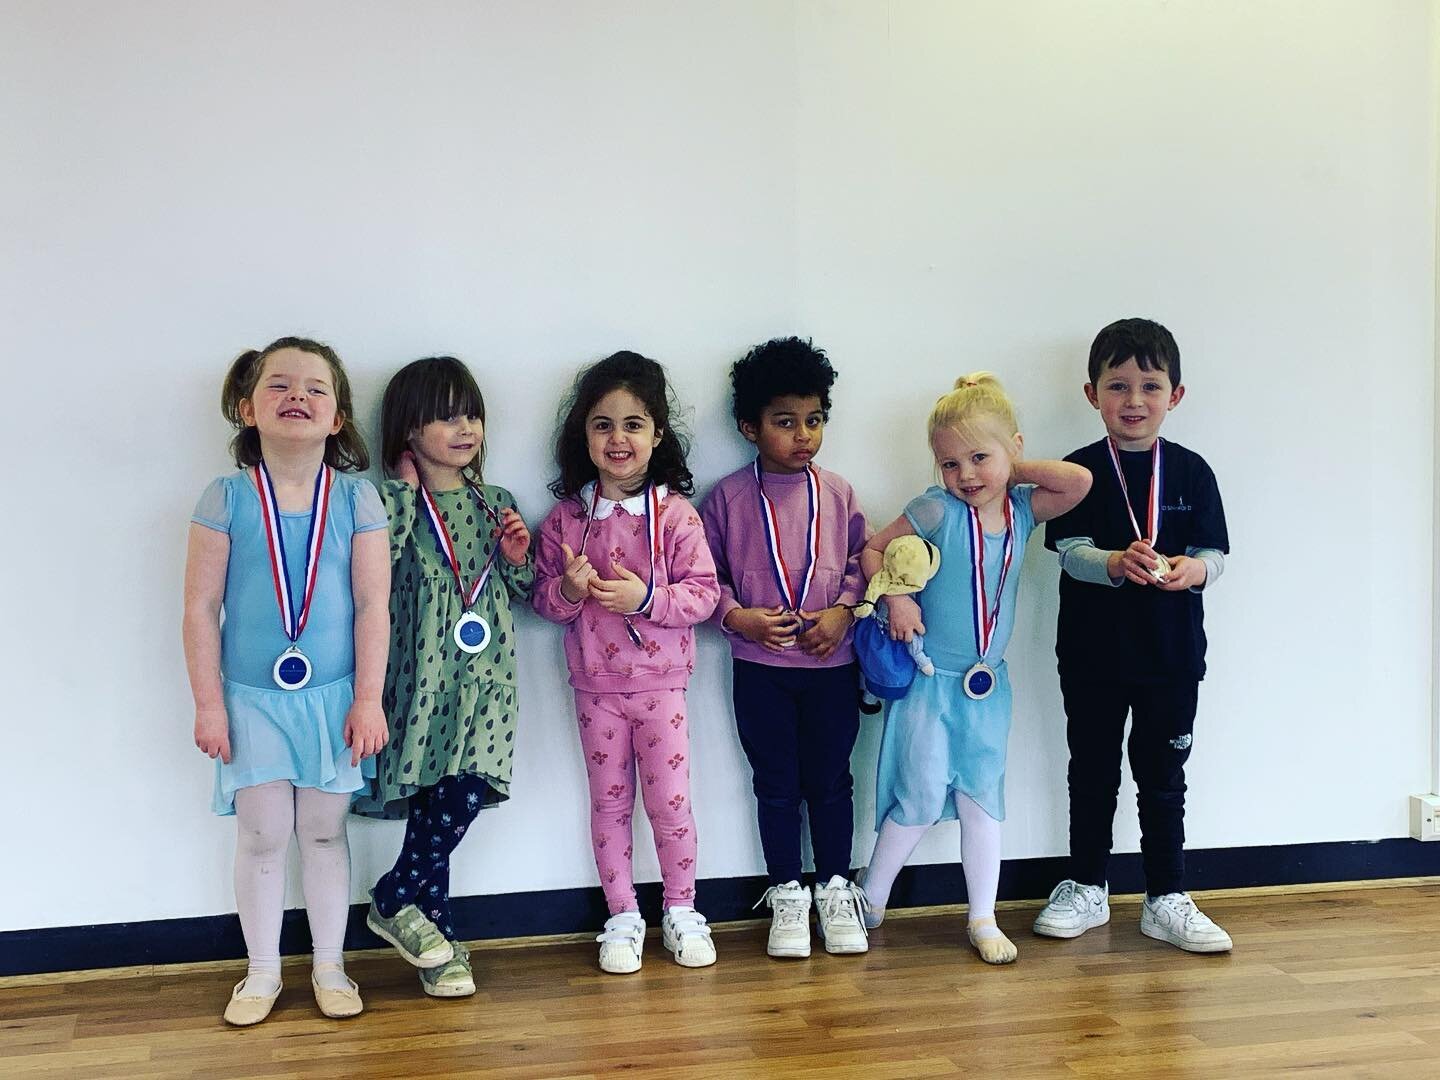 💙 Mini street dance collecting their reward medals! 💙

🏅 these medals are for doing some really great work over last term! And the best bit is that we are now going to be giving reward badges to add to your medals! 

💙 Love finding new ways to ke